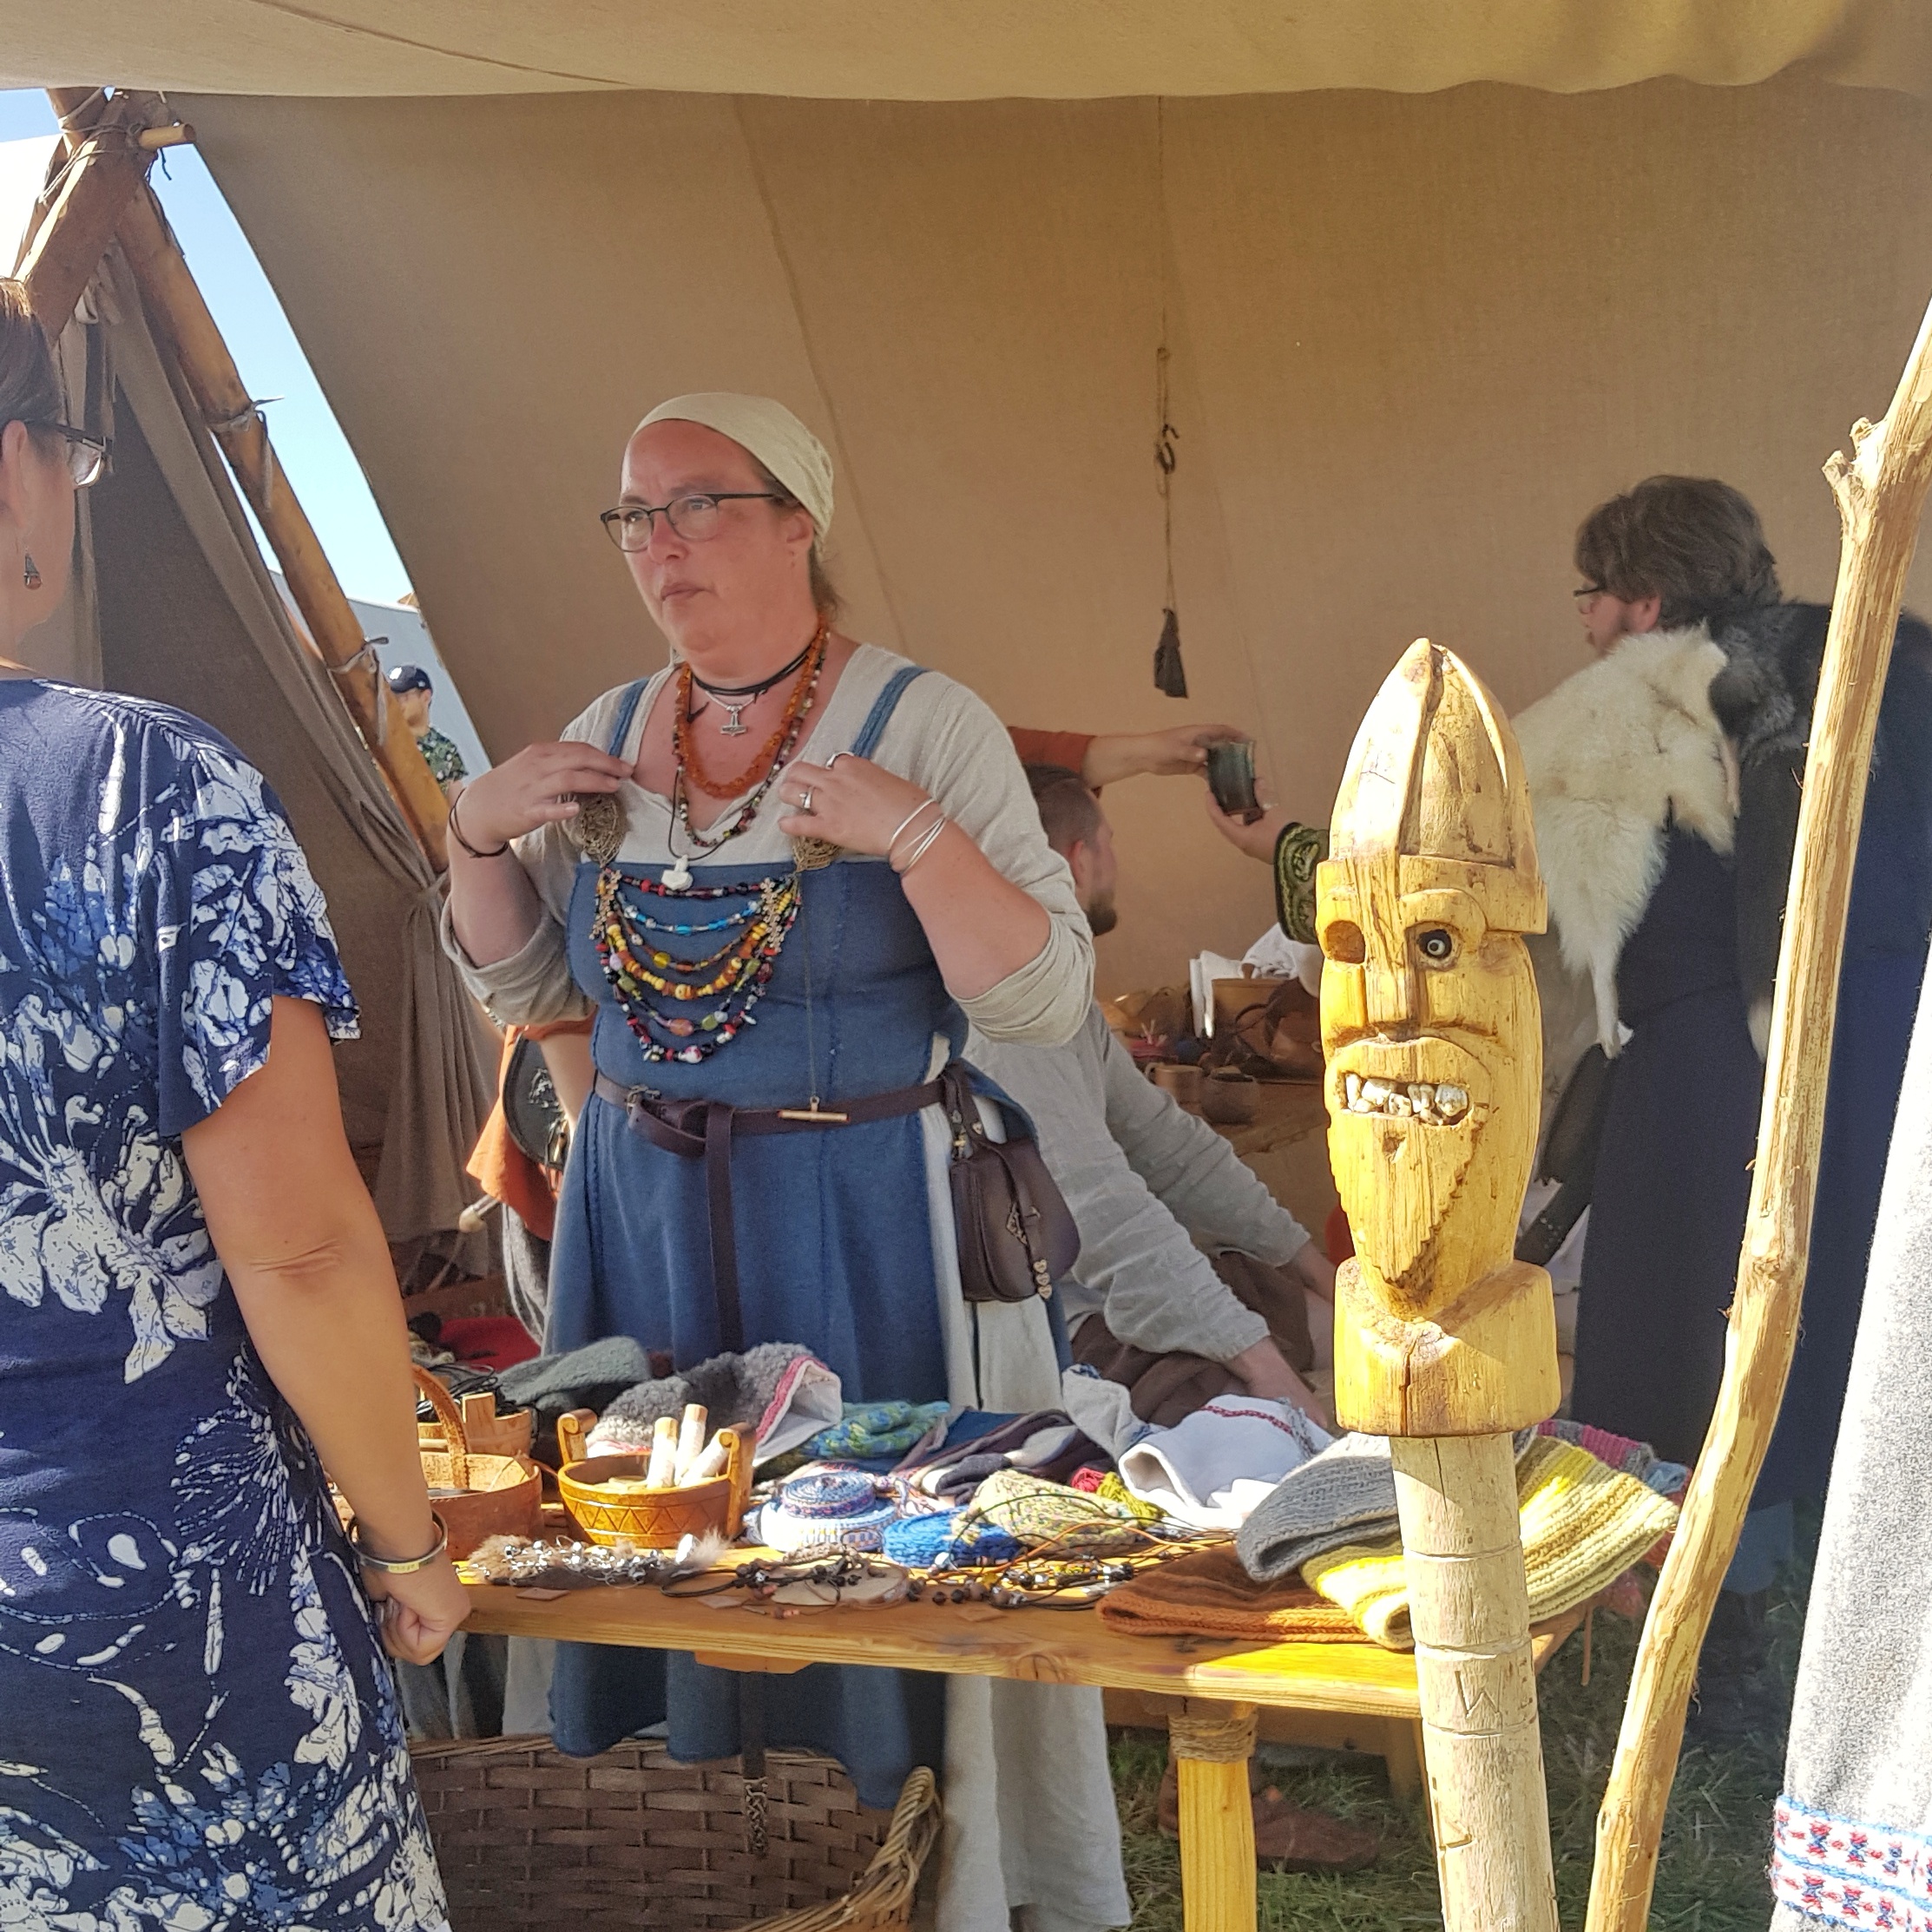 Day 236 - August 24: Iron Age Market Day